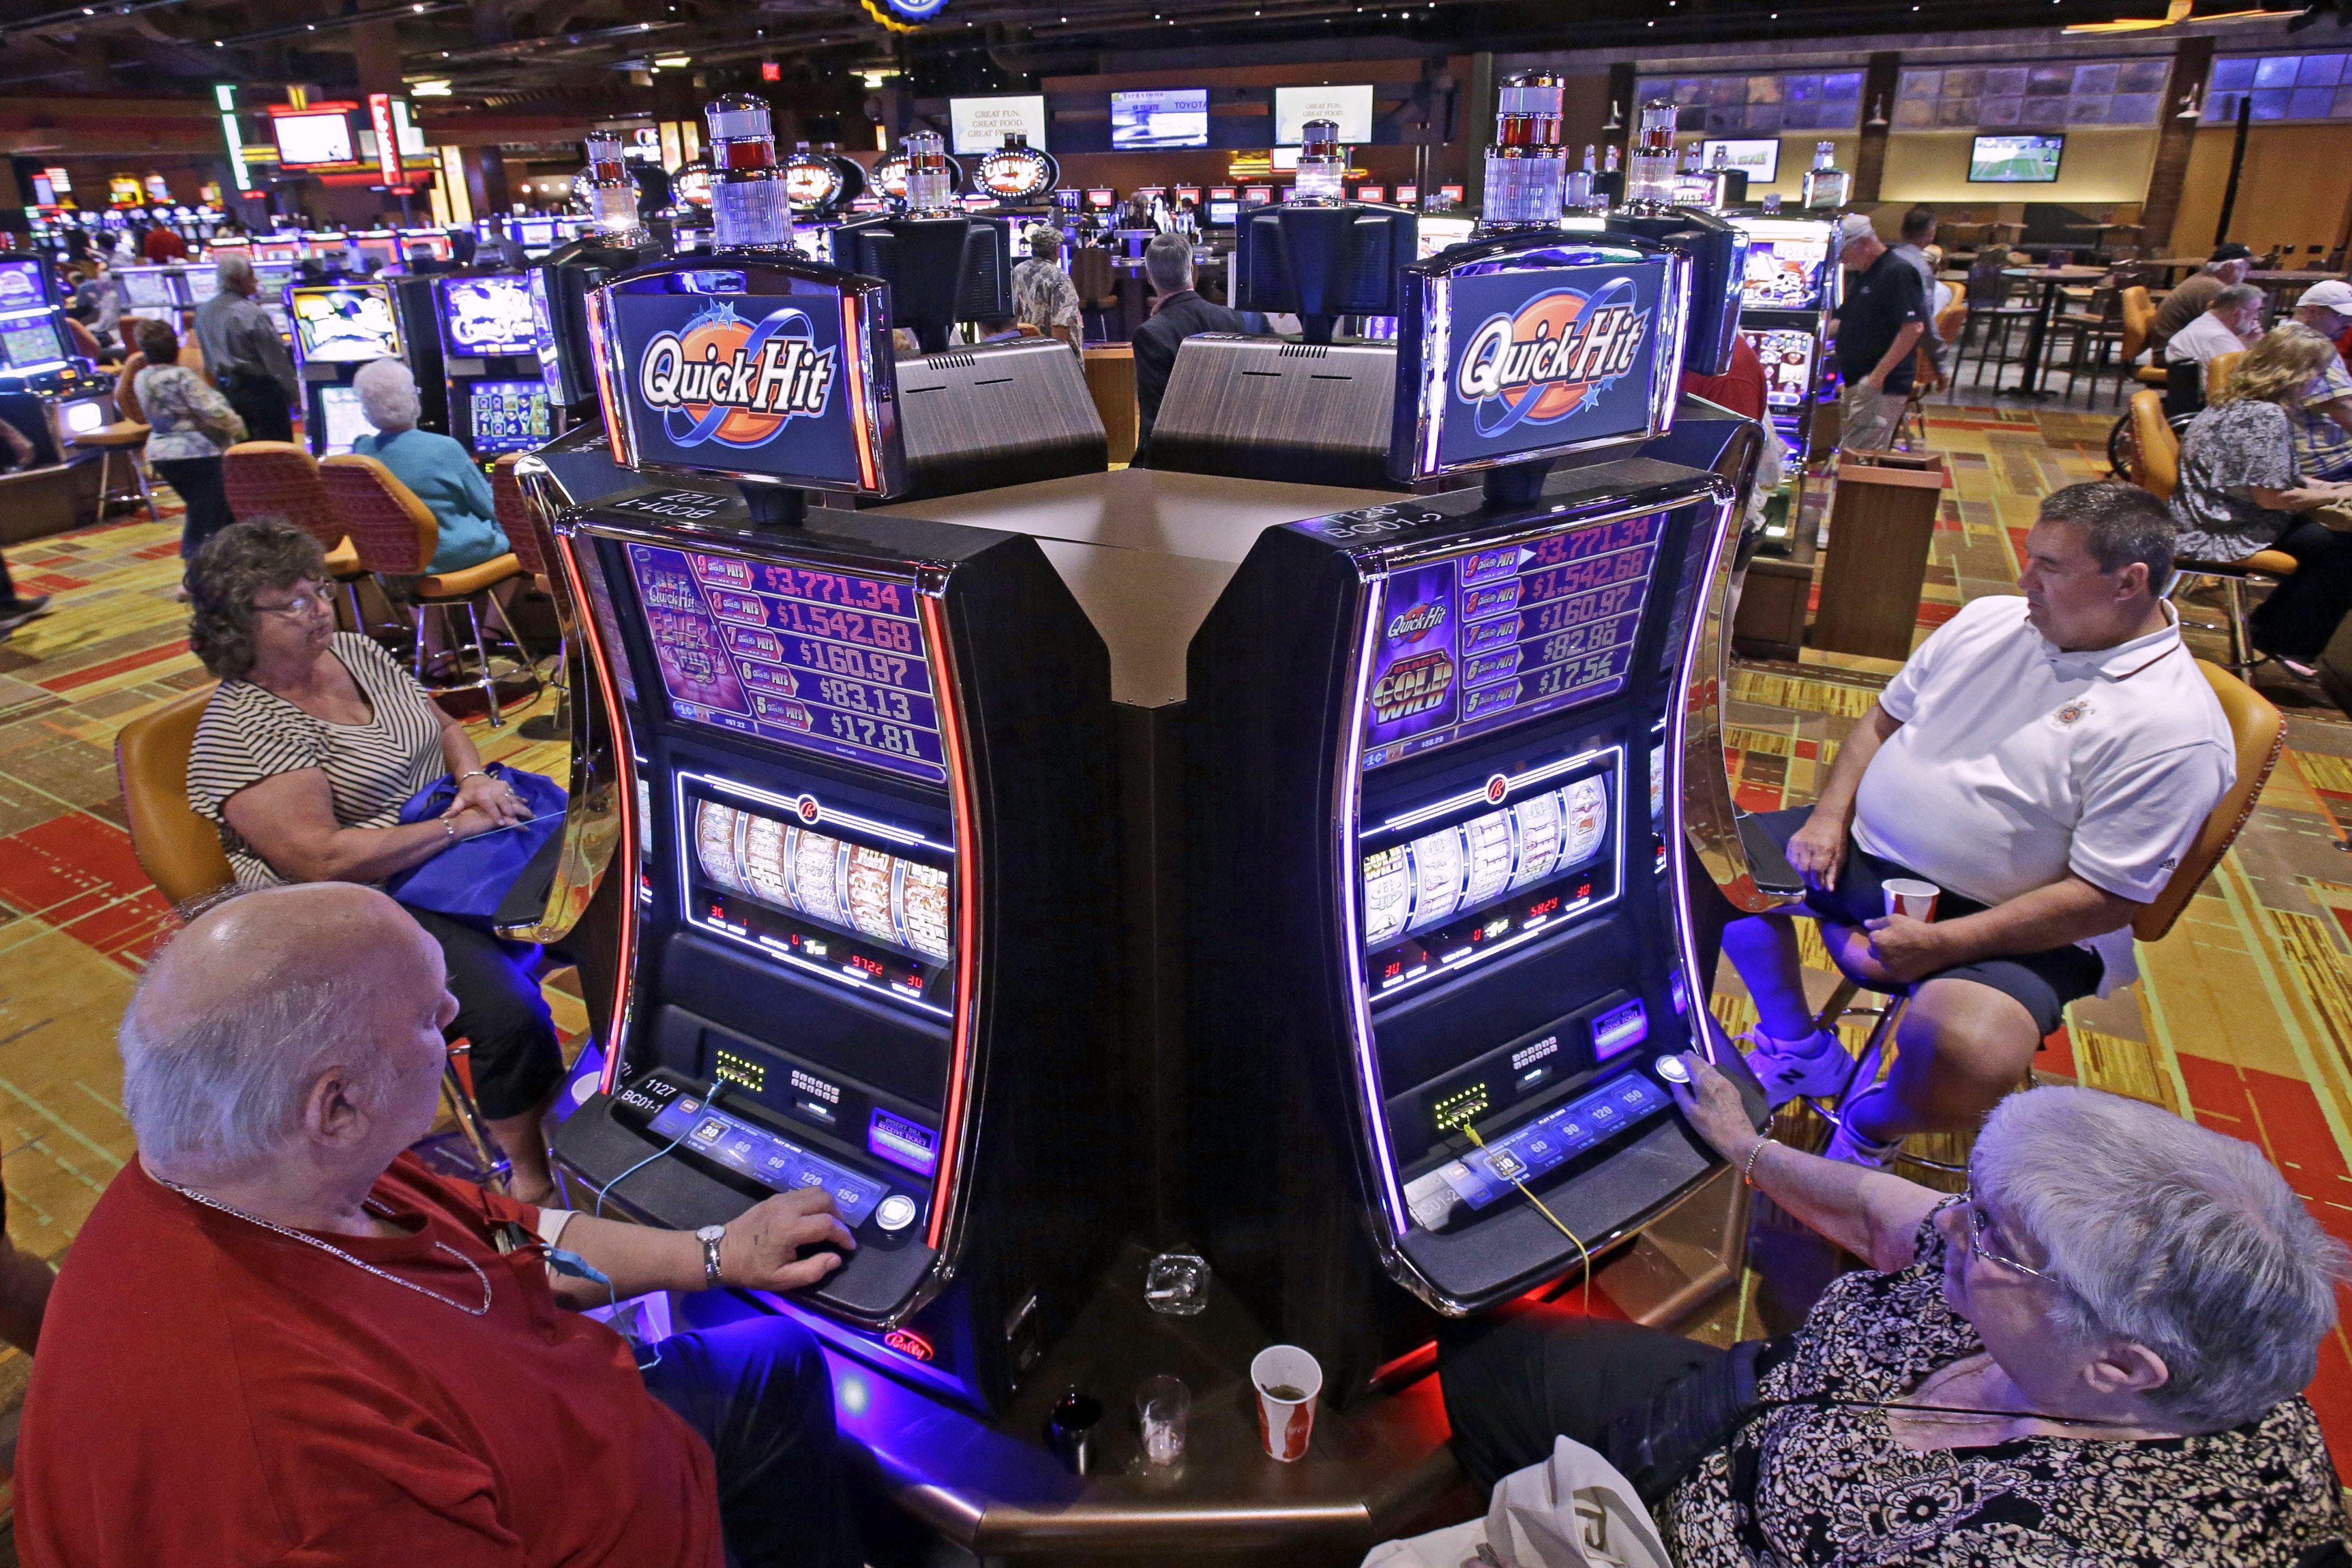 Betting with a smartphone? The casinos know who you are, and where you are  located.